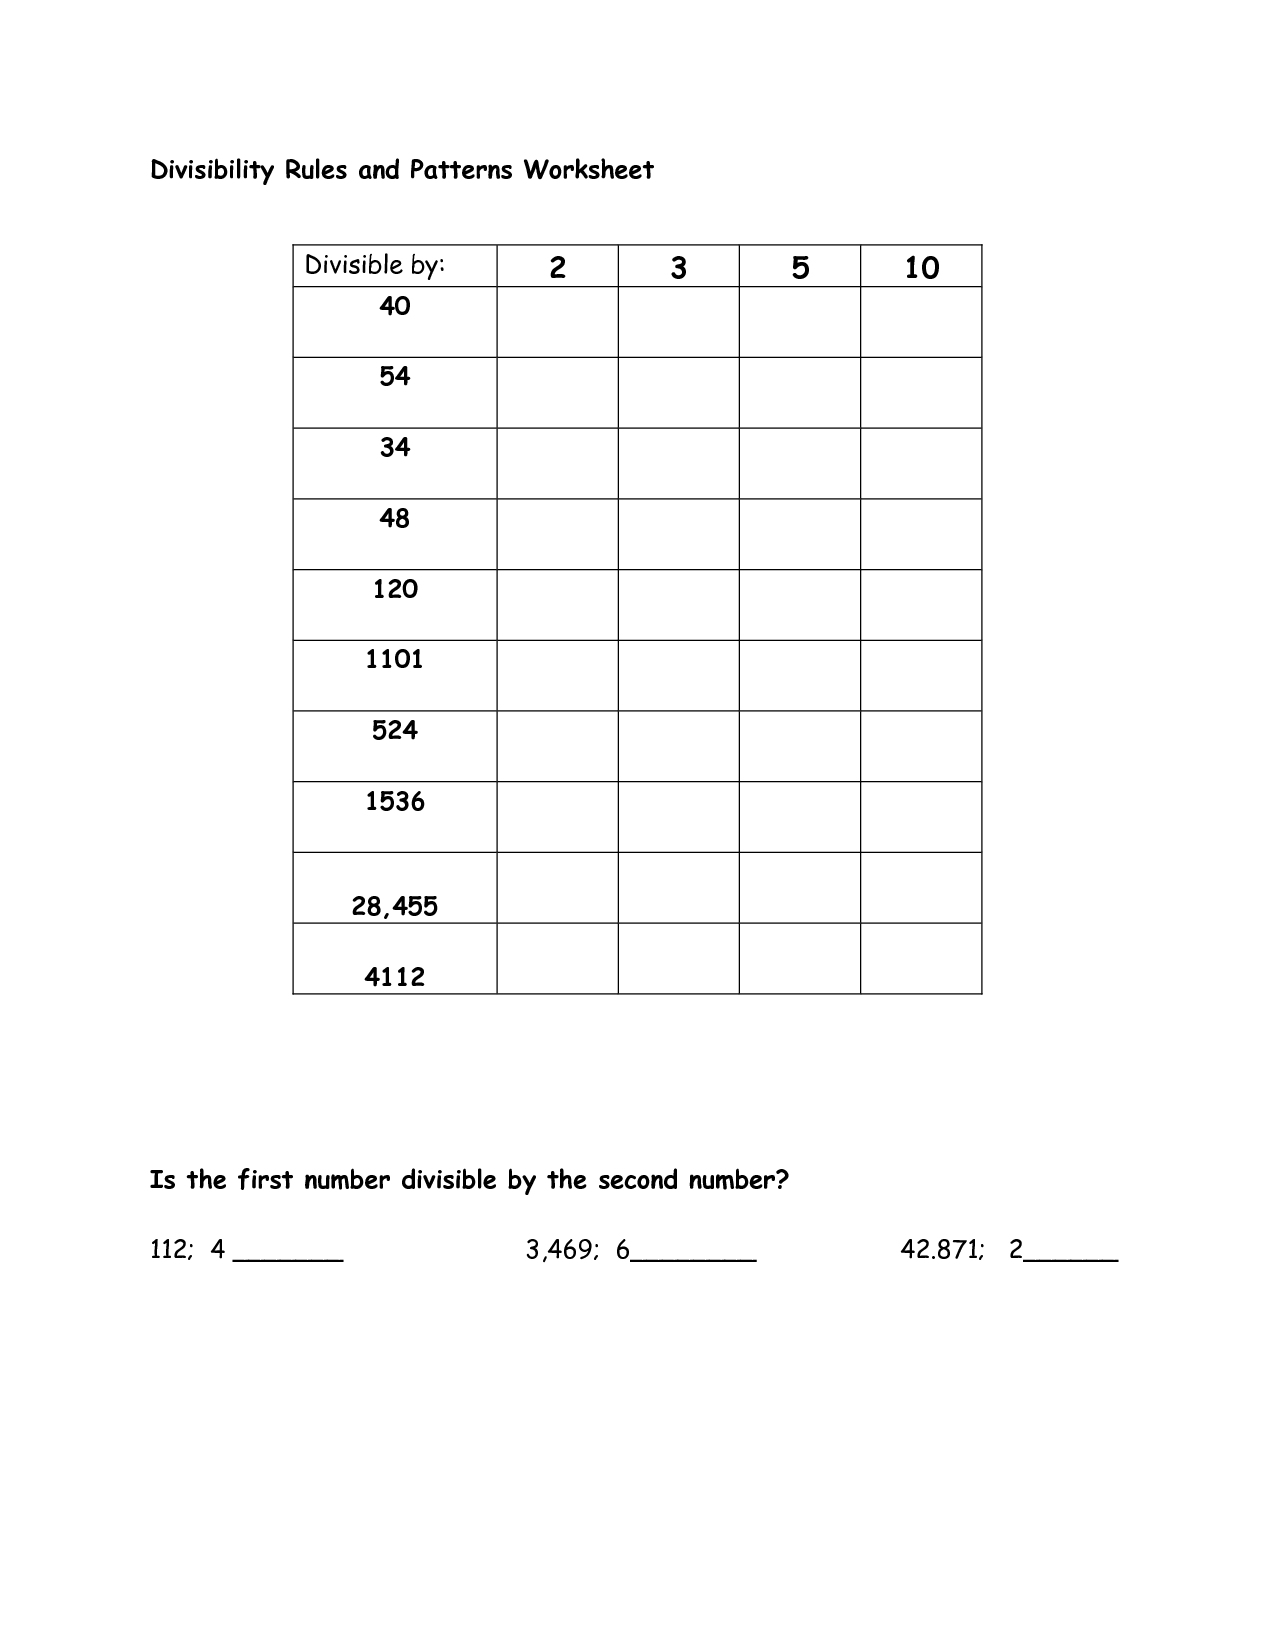 15 Best Images of Who Rules Worksheet - Divisibility Rules Worksheet